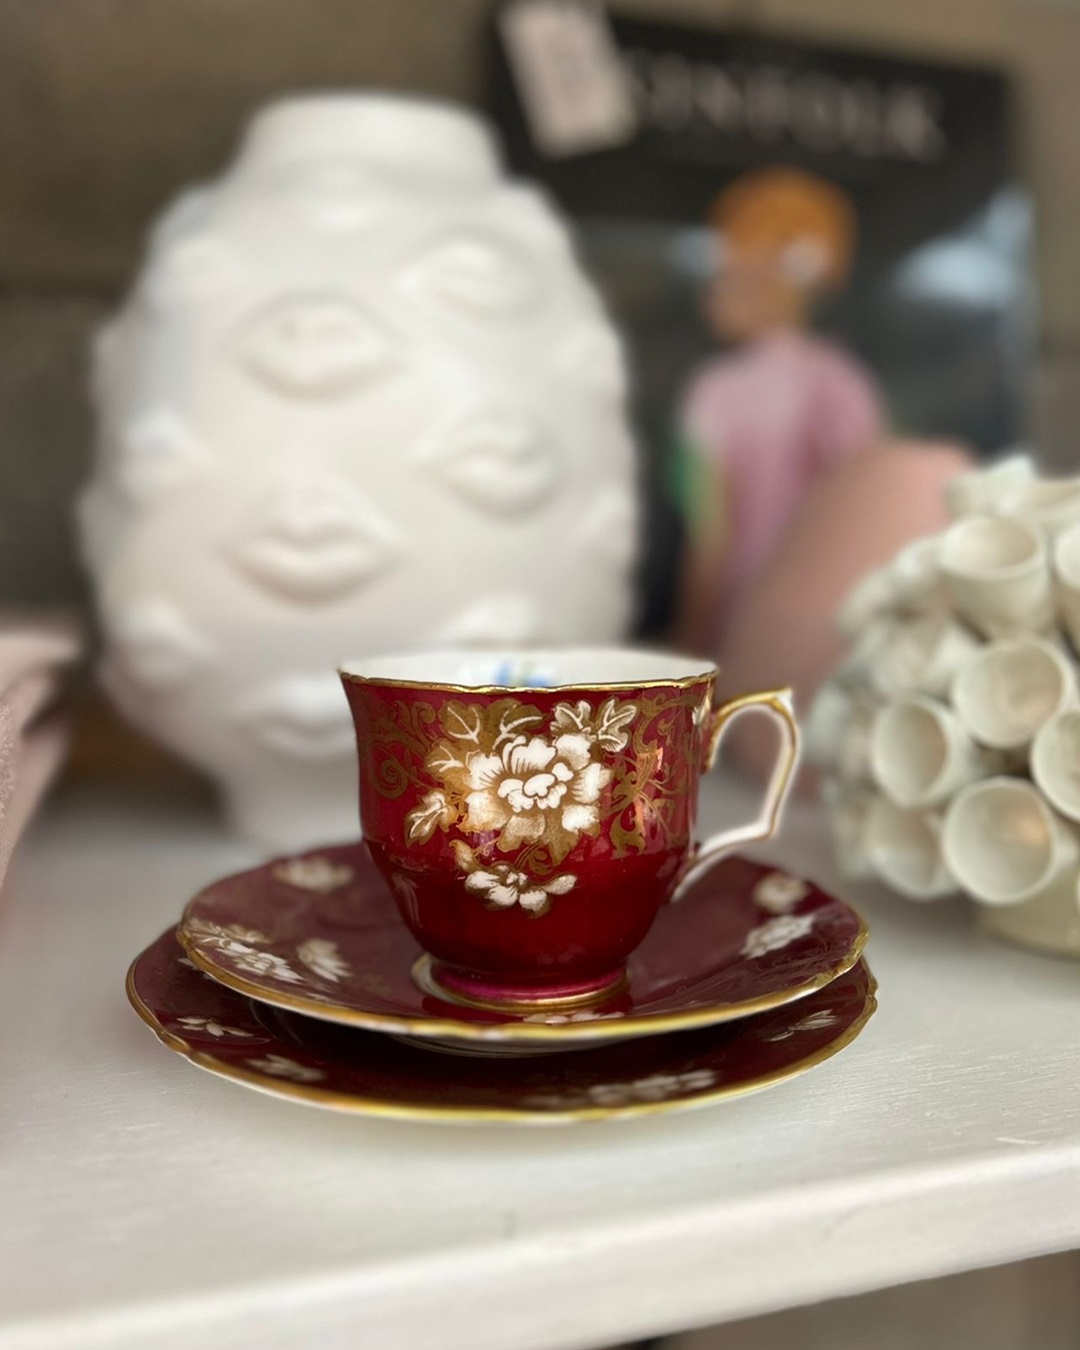 Red flower china cup on saucer on shelf